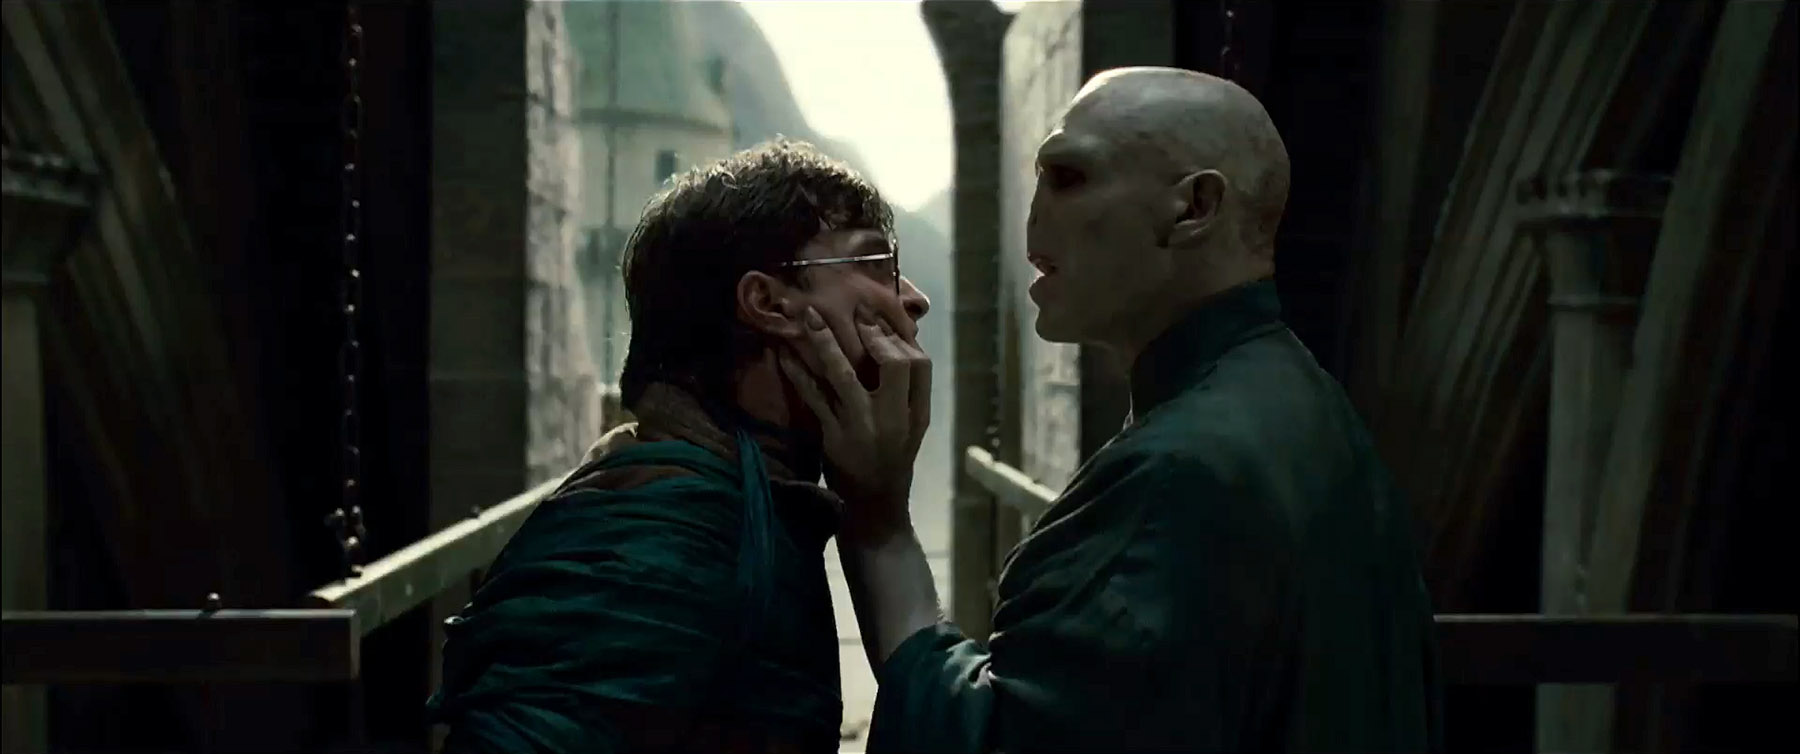  Daniel Radcliffe as Harry Potter and Ralph Fiennes as Lord Voldemort in Warner Bros. Pictures' fantasy adventure "Harry Potter and the Deathly Hallows: Part I". 